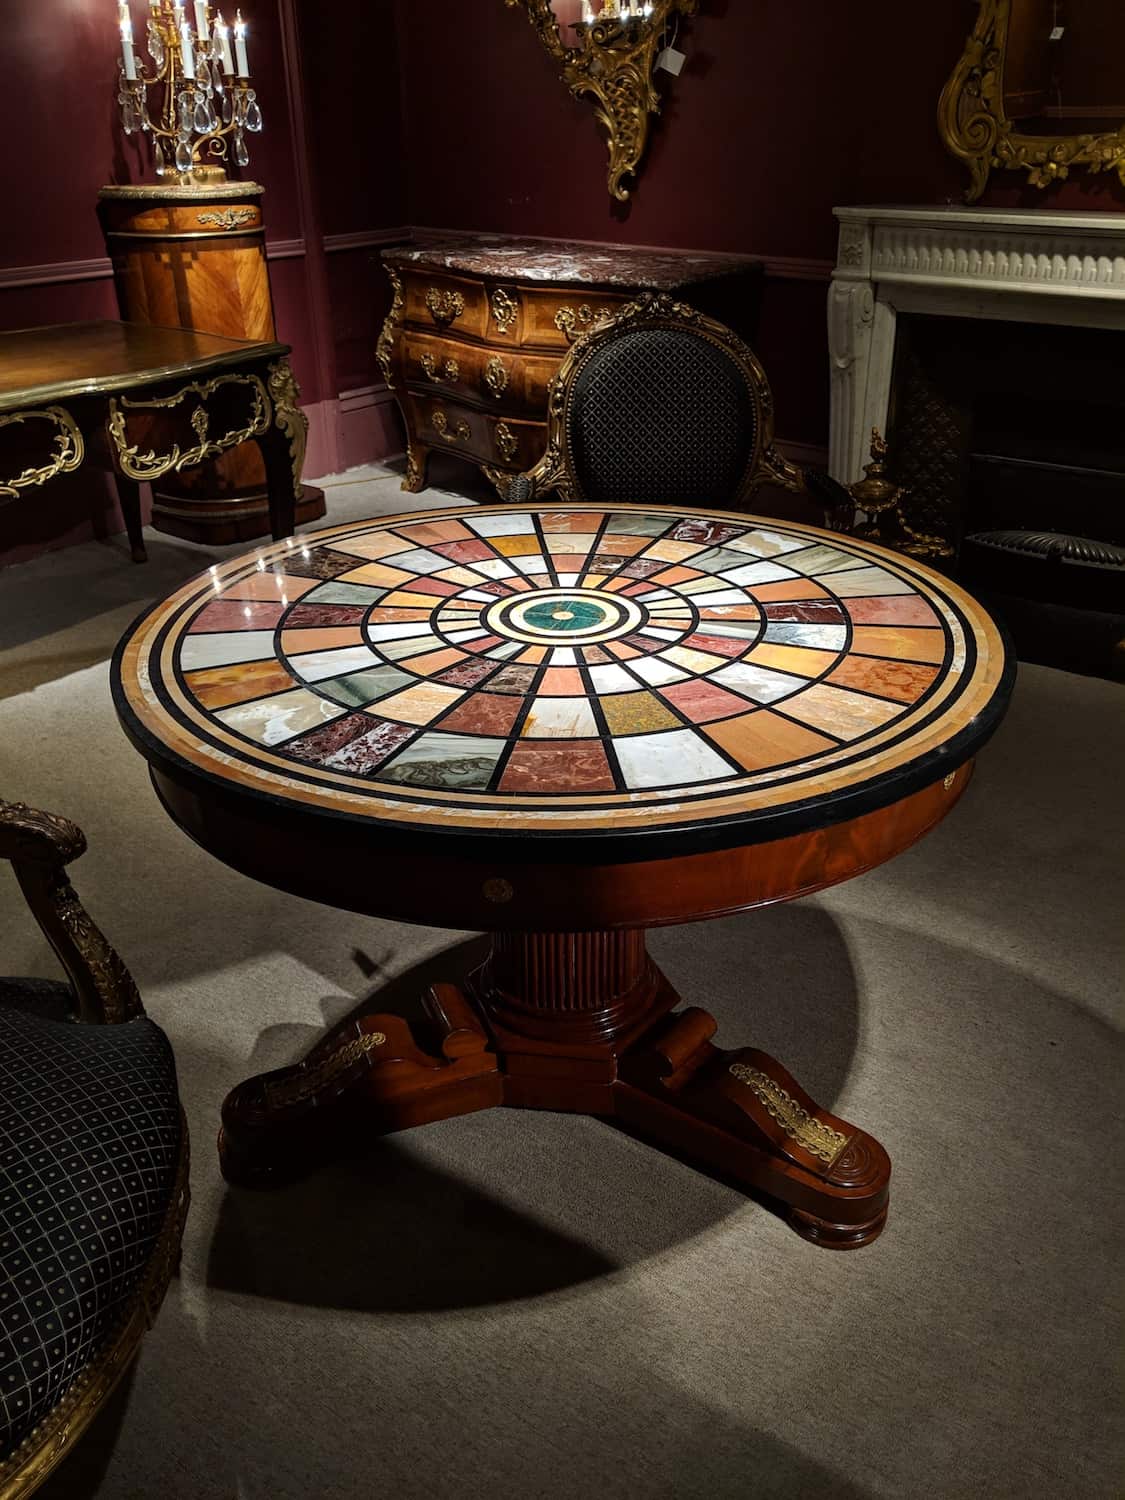 Detailed inlays make this antique table so unique!